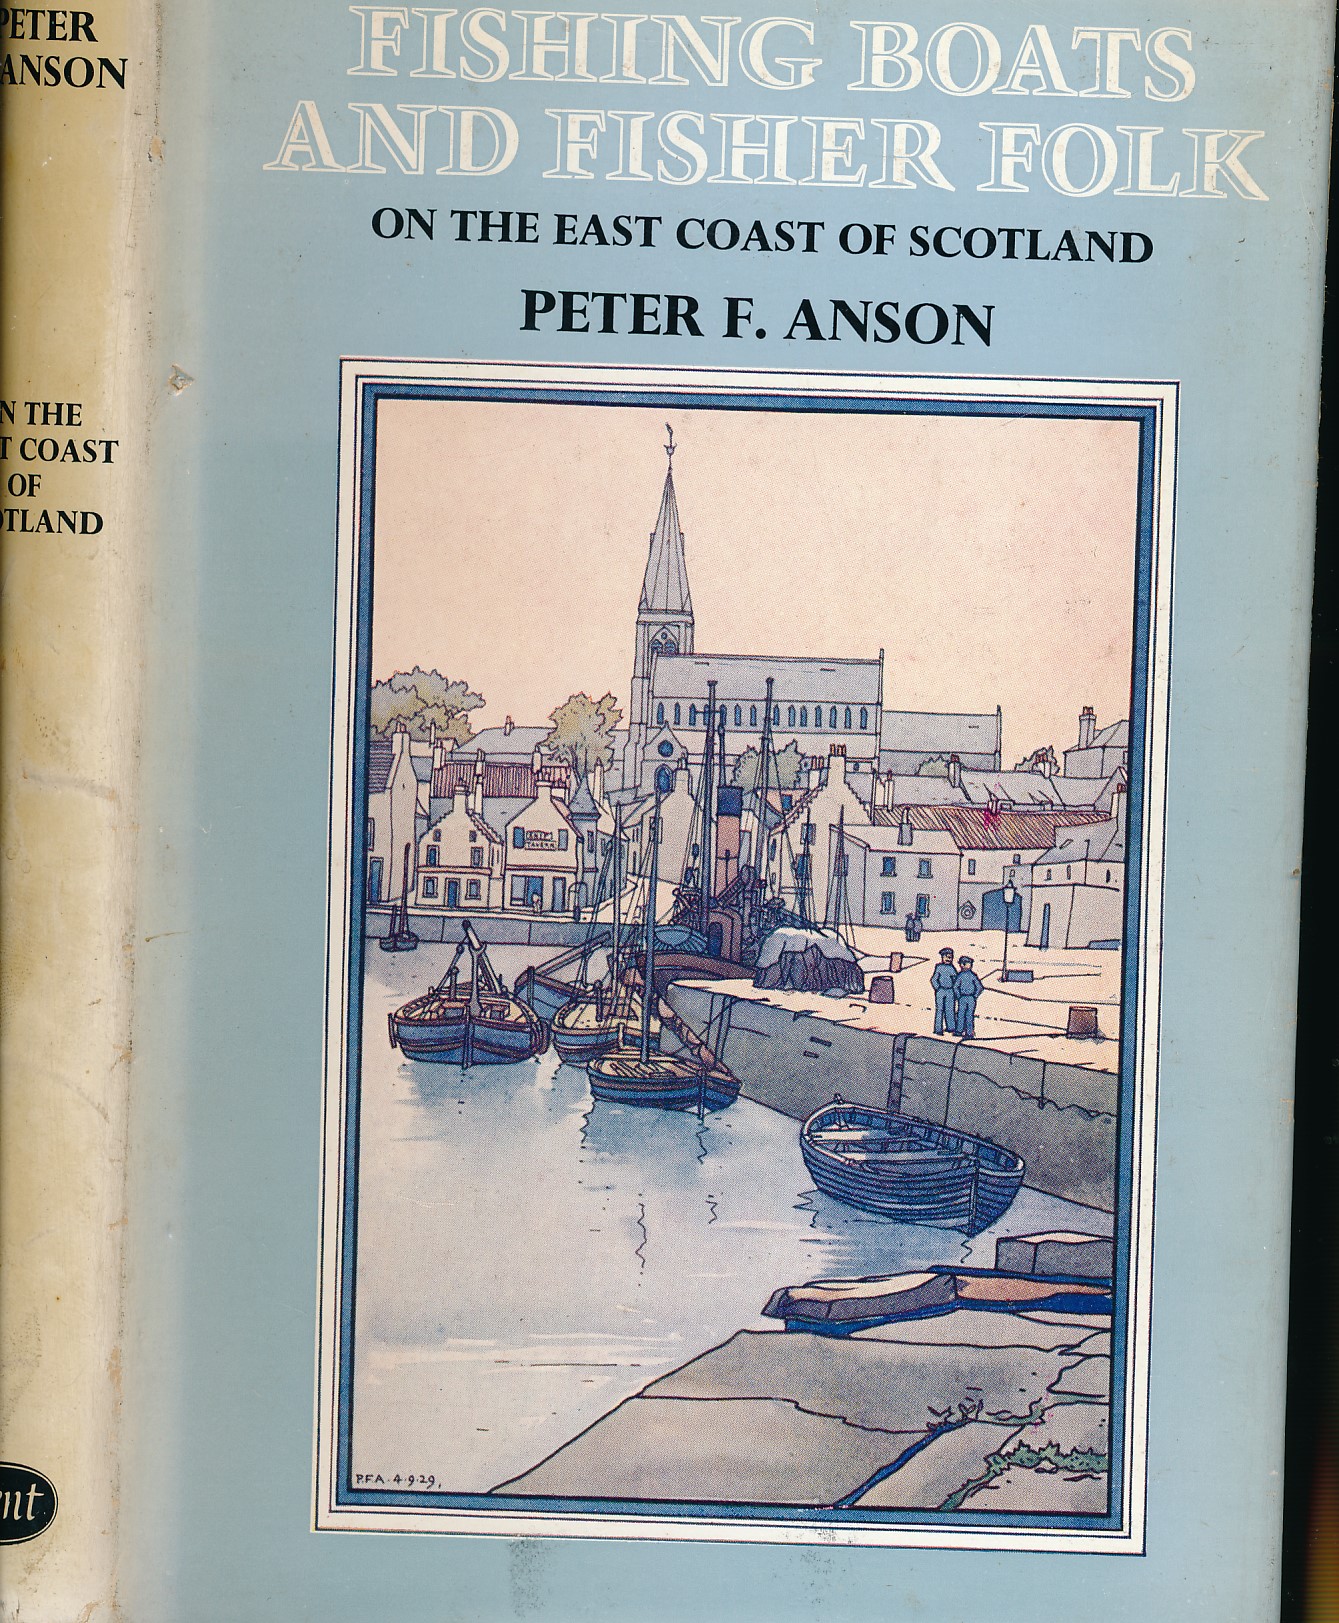 Fishing Boats and Fisher Folk on the East Coast of Scotland